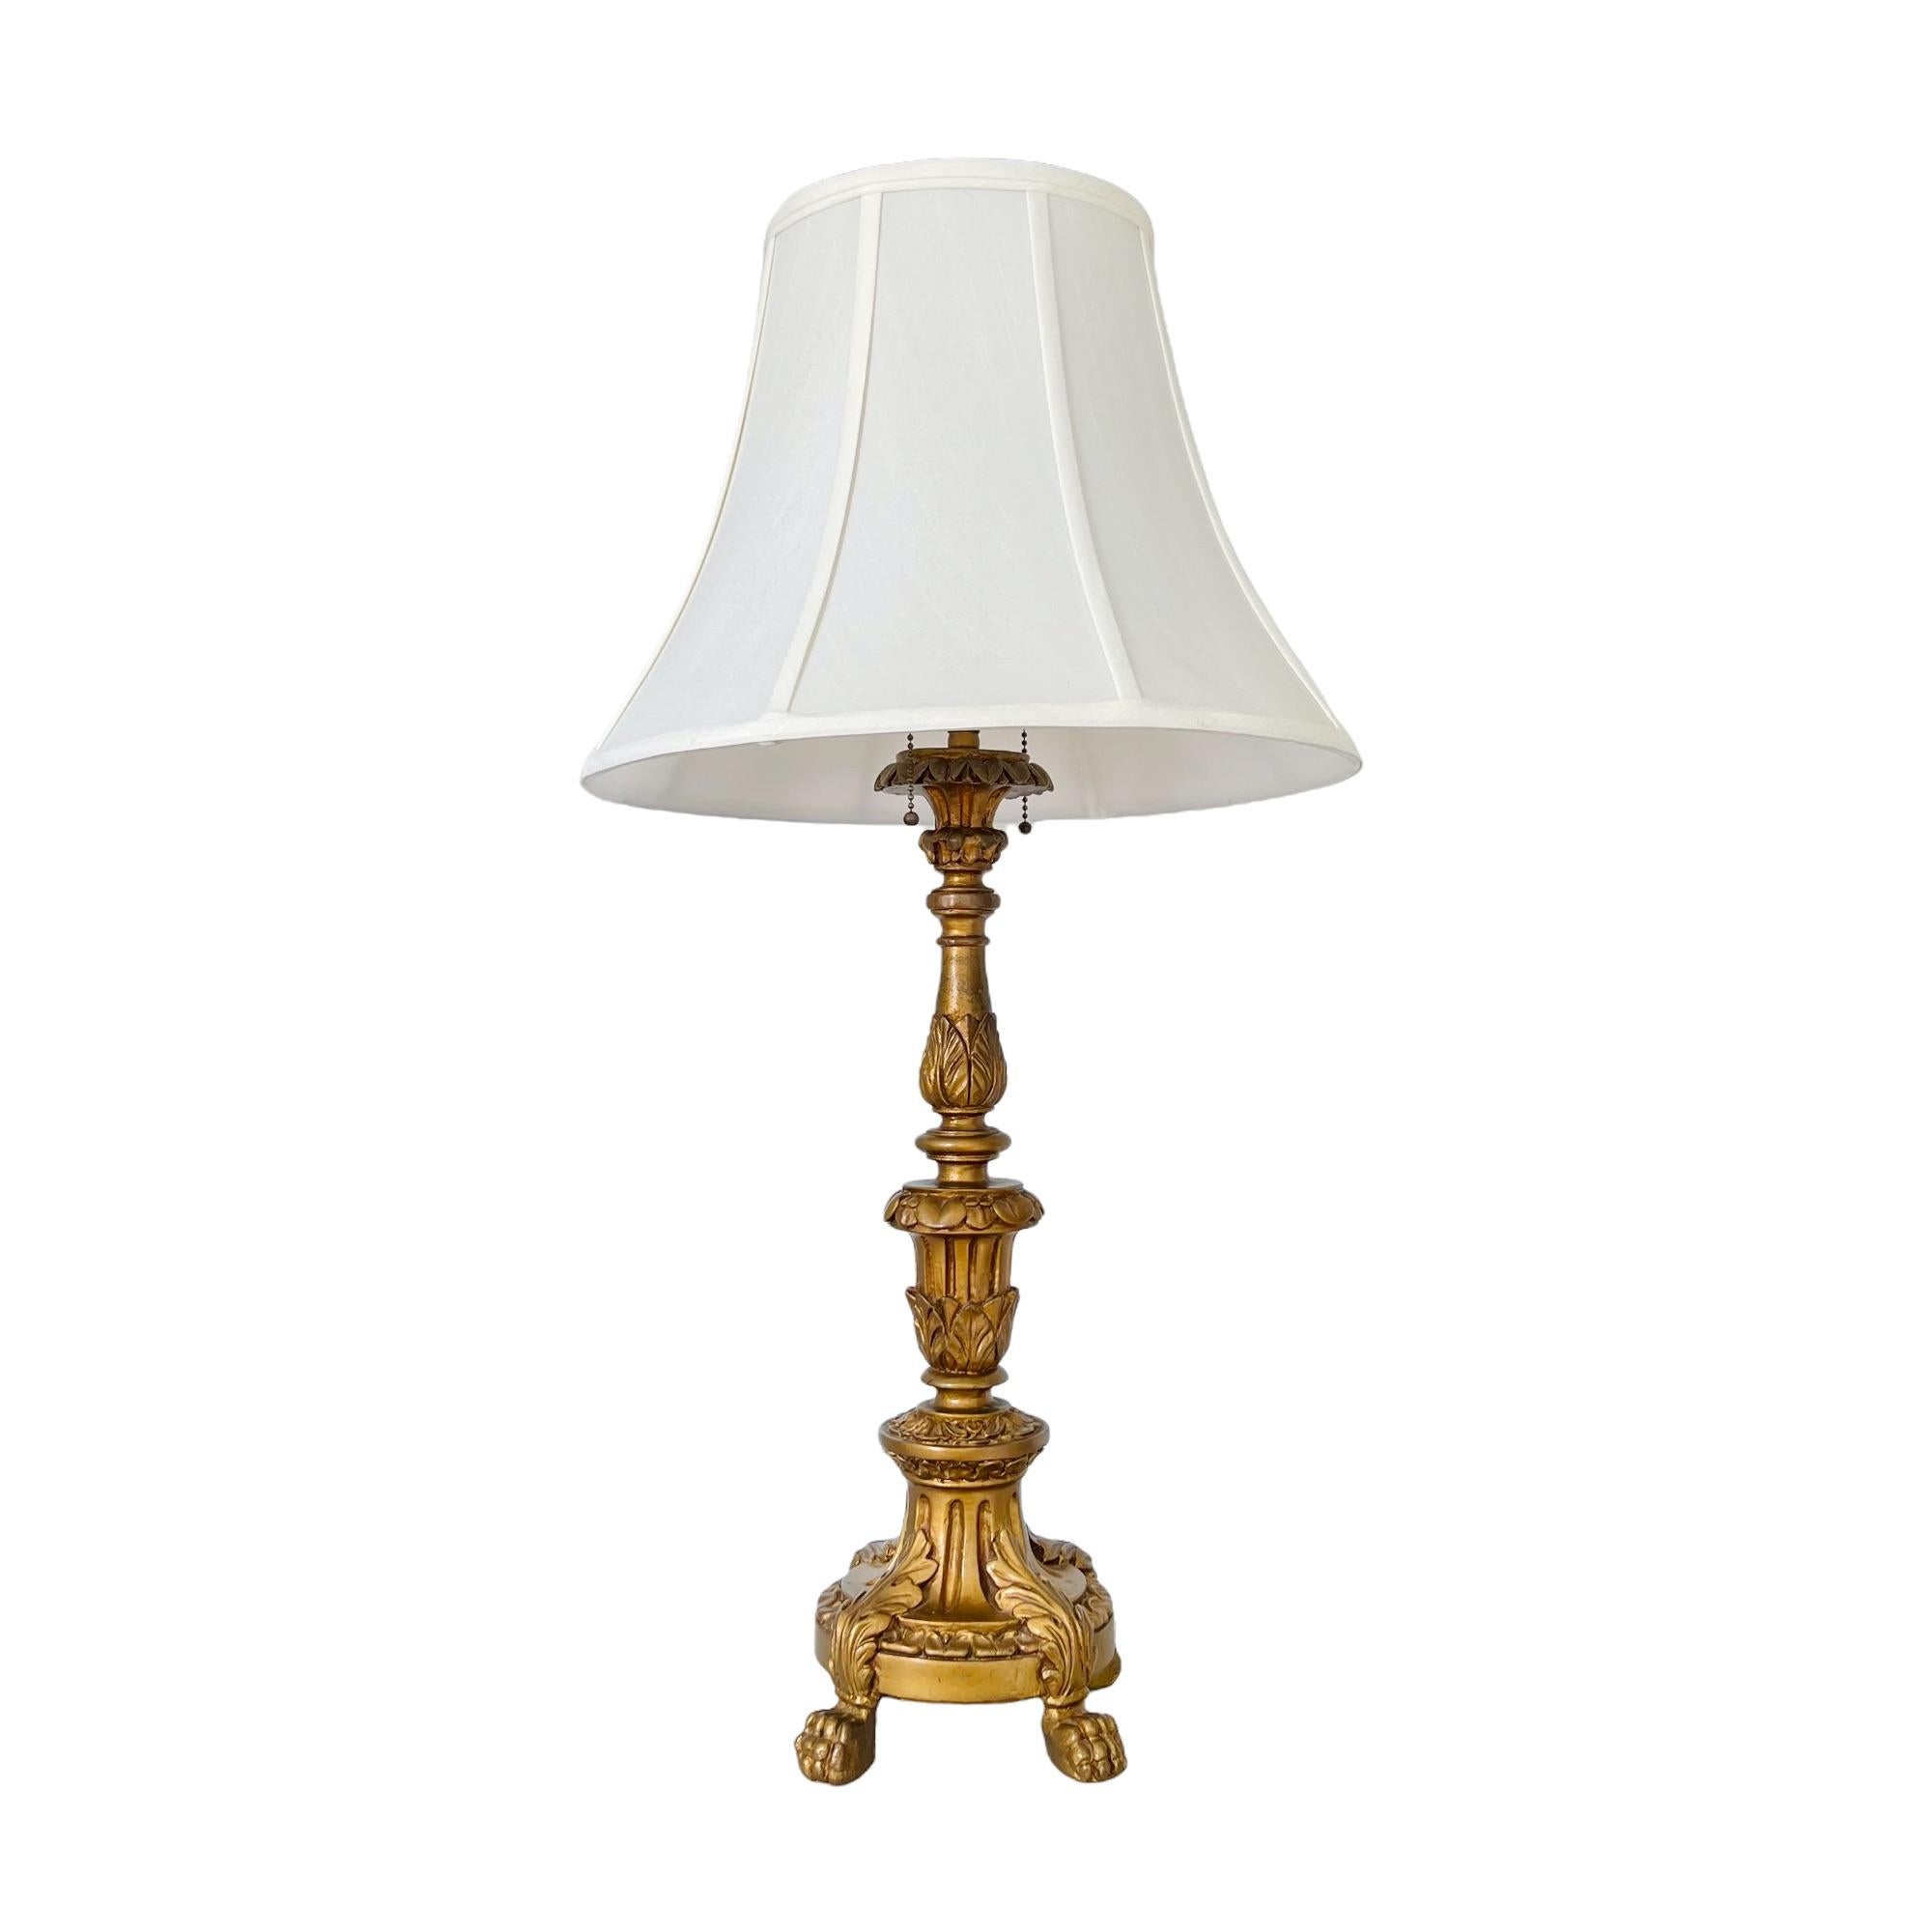 Cast Early 20th Century French Empire Gilt Gesso Lamp For Sale